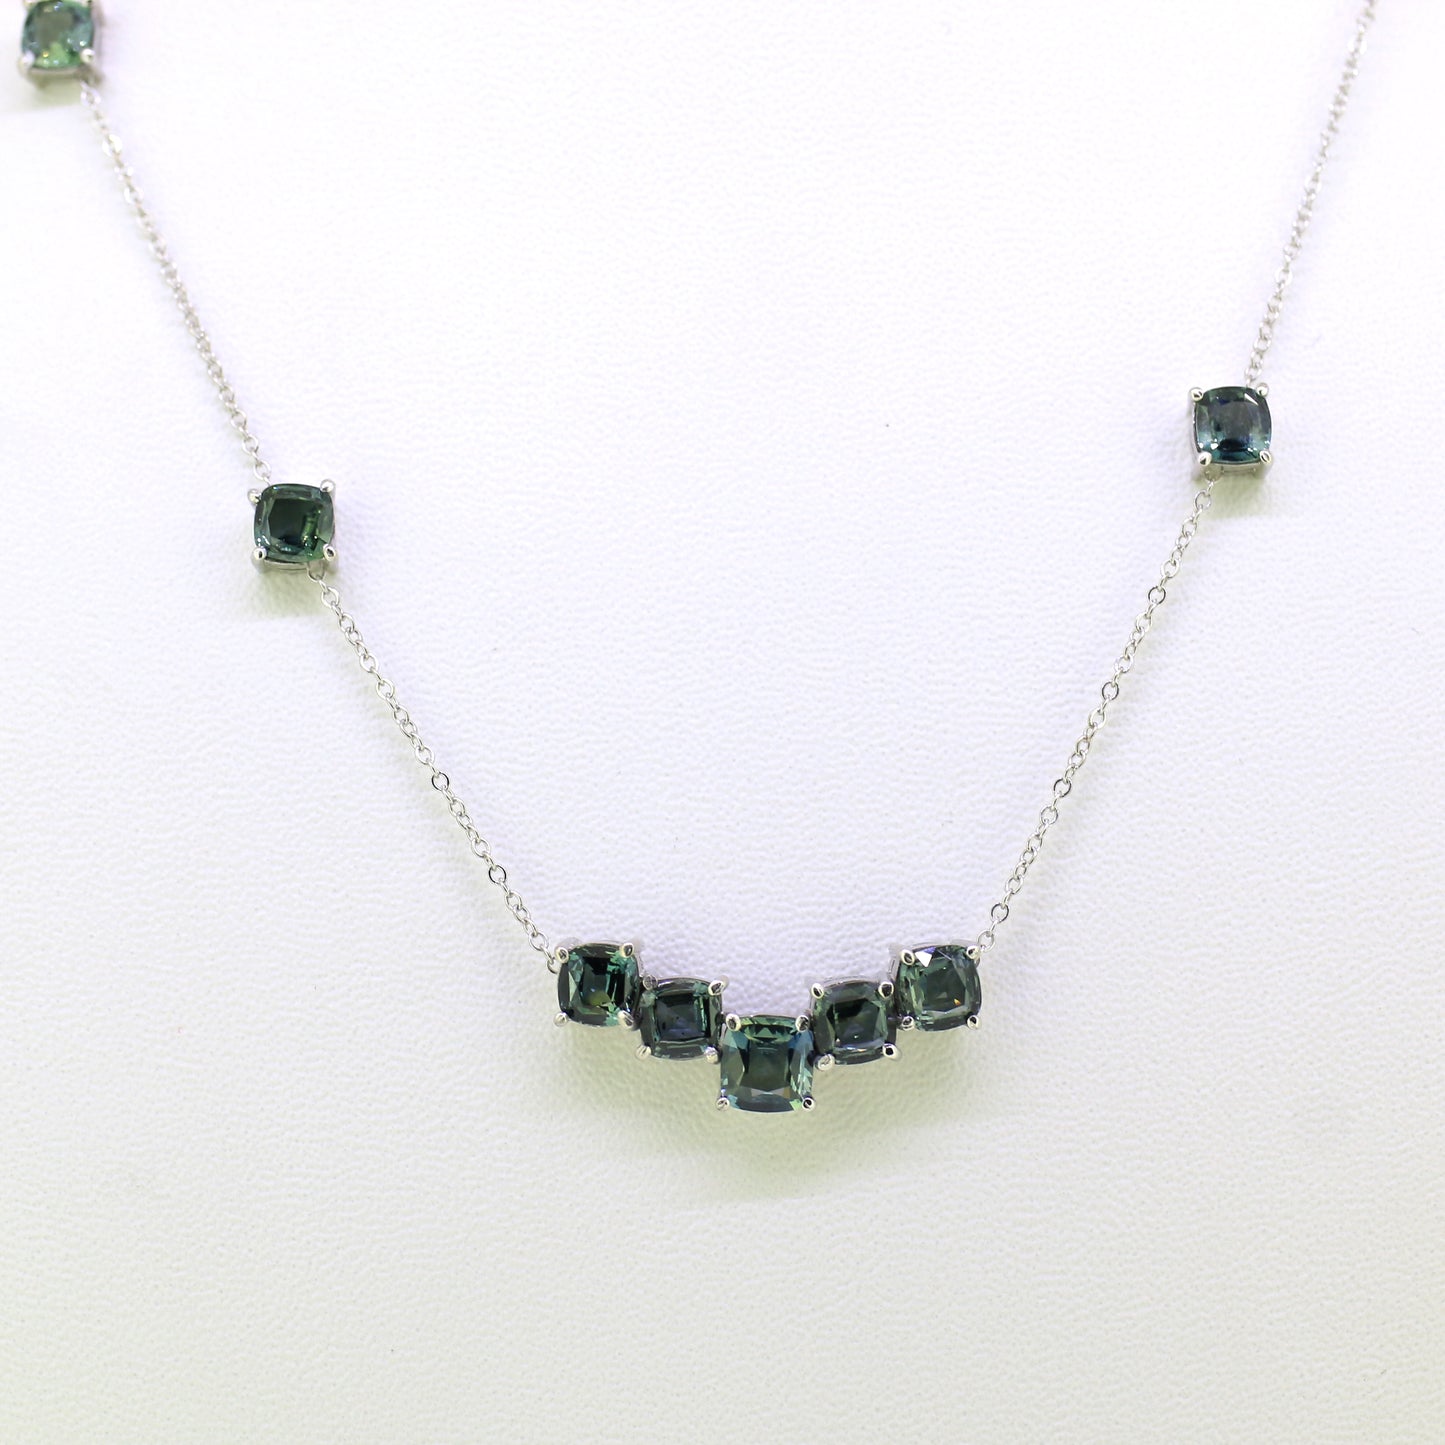 Teal Sapphire Necklace 18k White Gold 9.20 gm